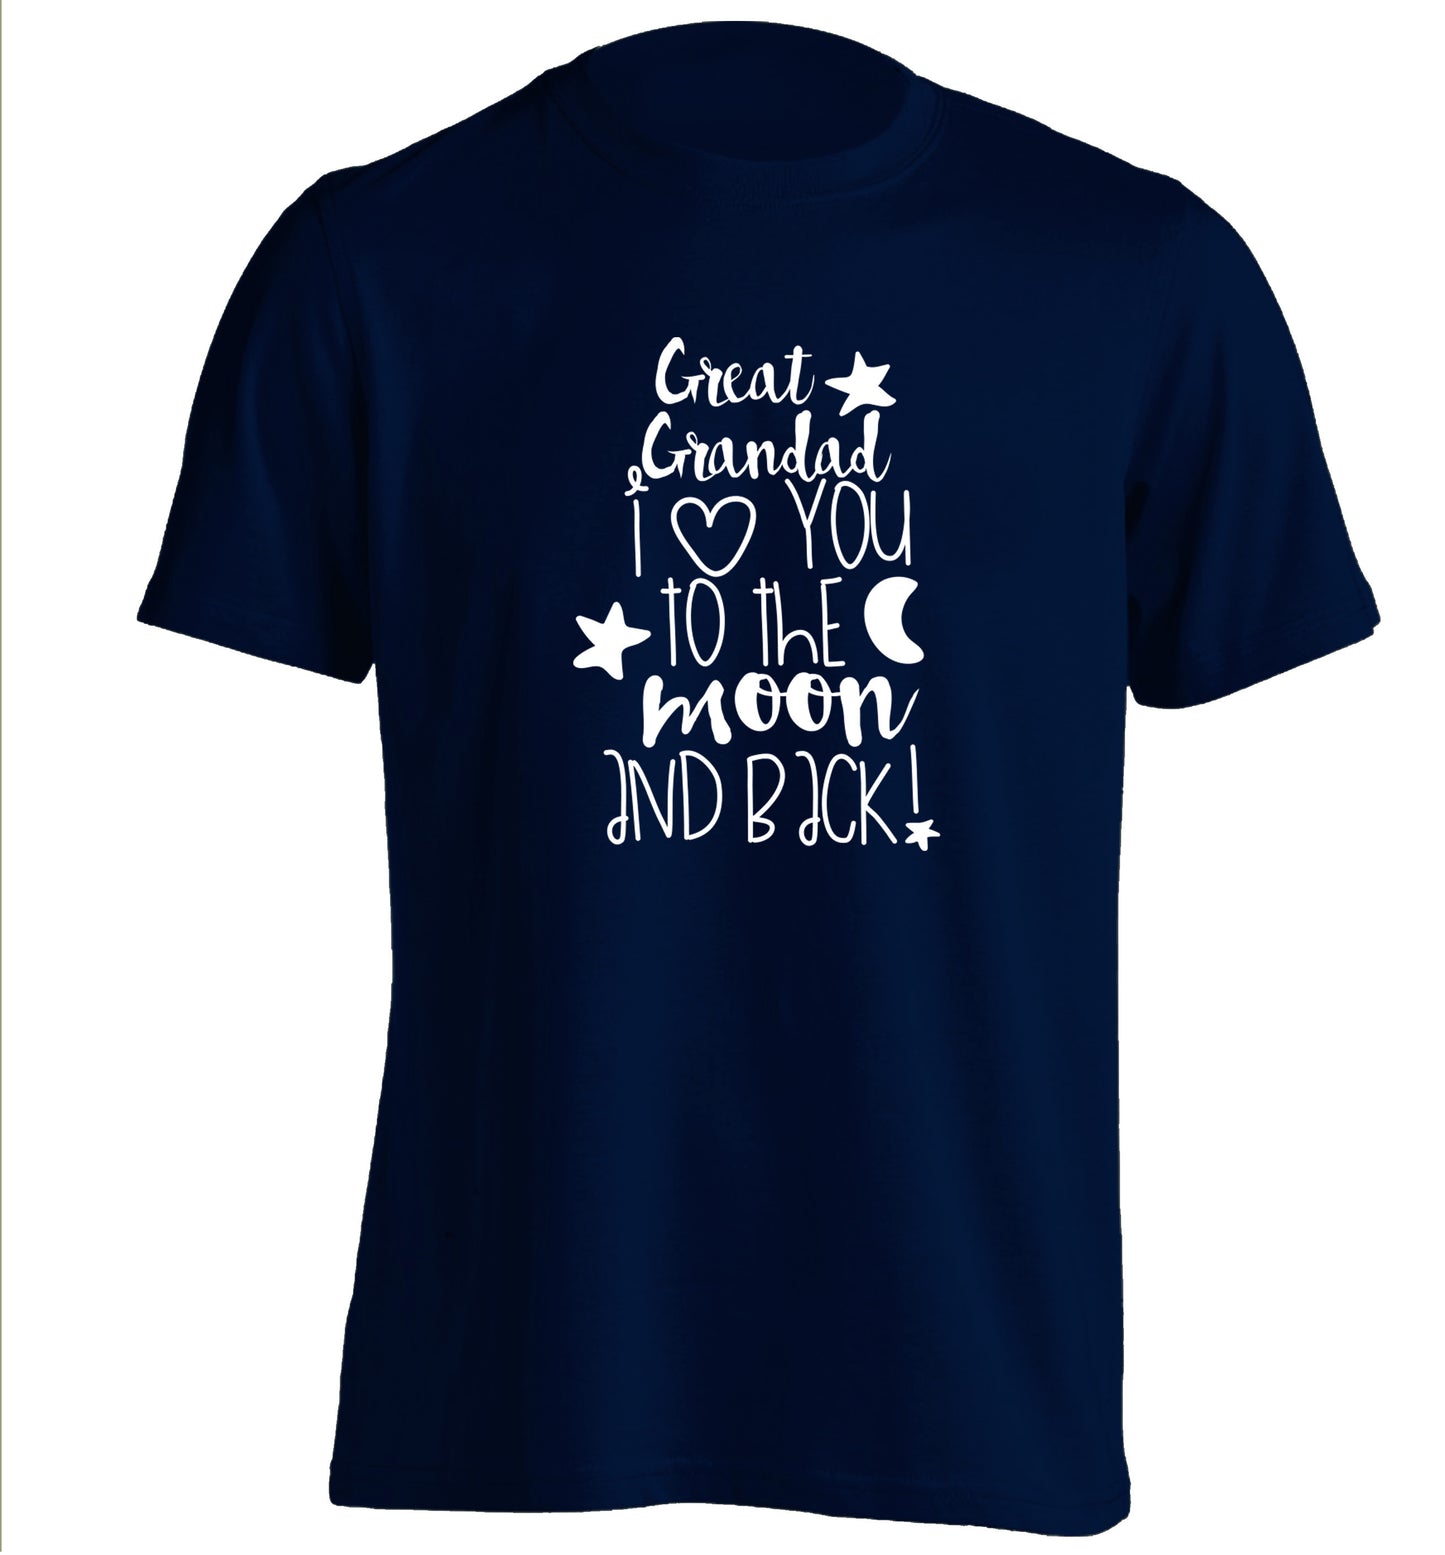 Great Grandad I love you to the moon and back adults unisex navy Tshirt 2XL